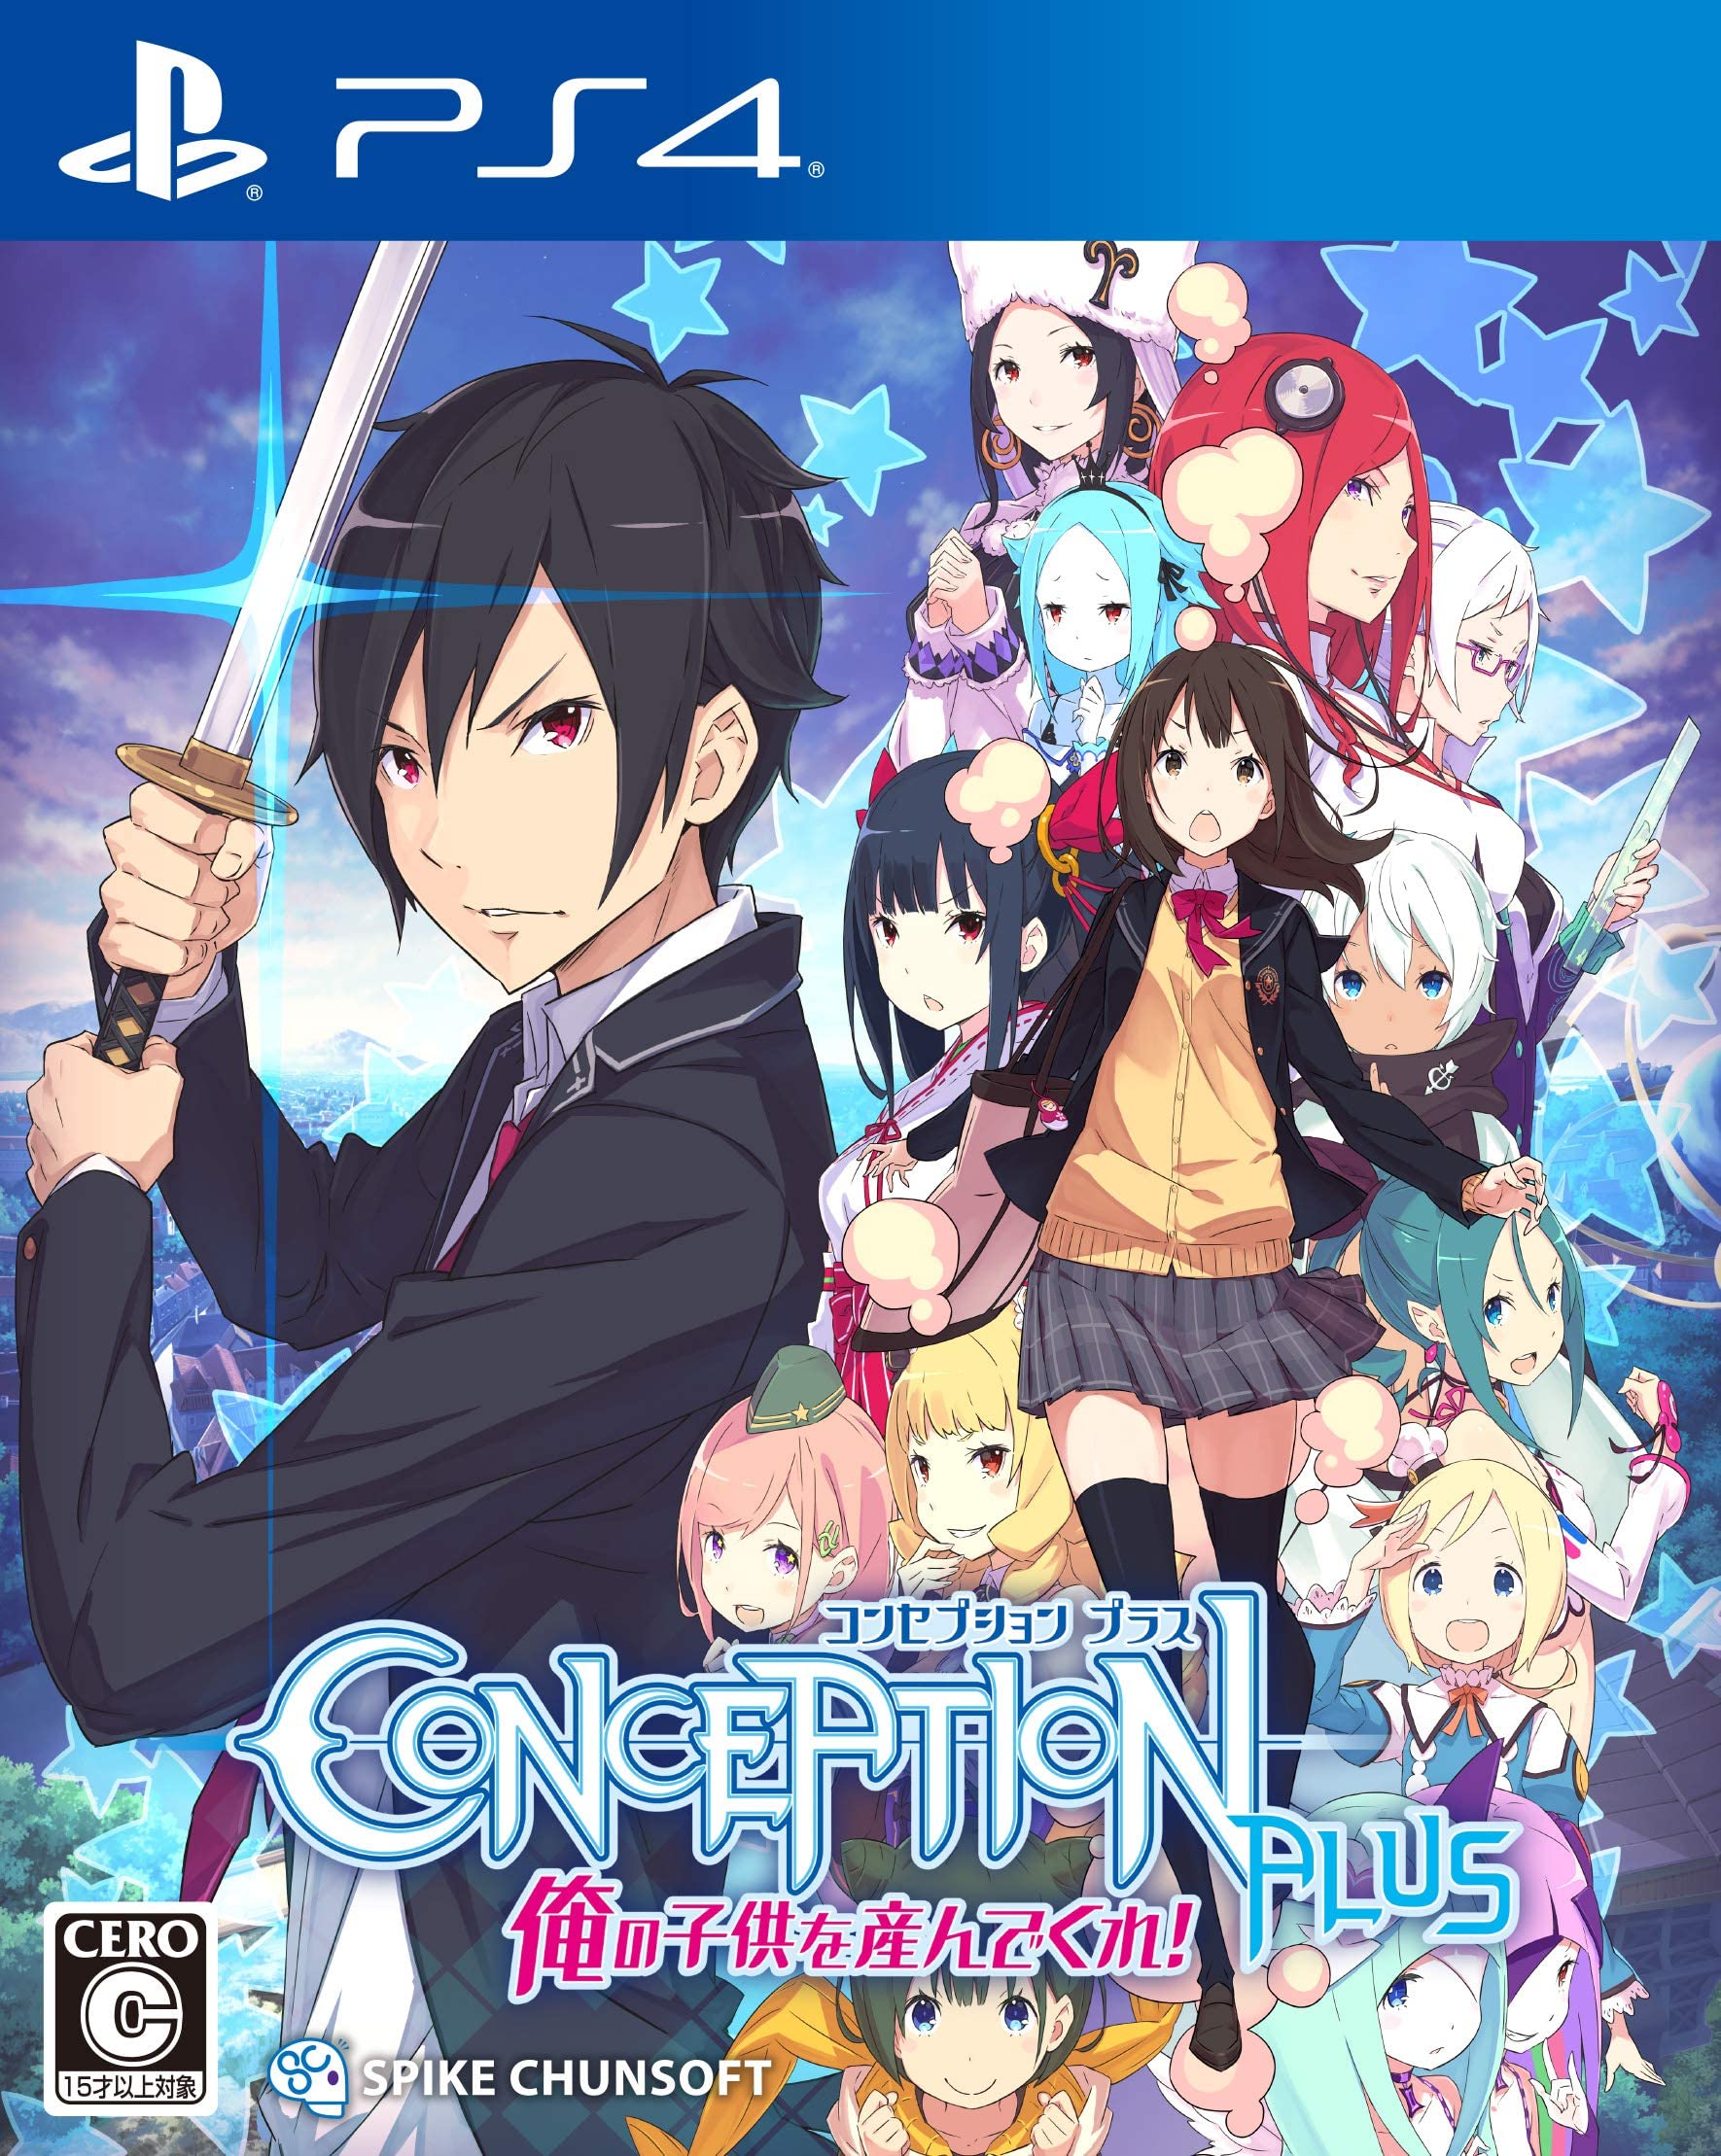 PlayStation 4 JP - Conception Plus Maidens of the Twelve Stars.jpg